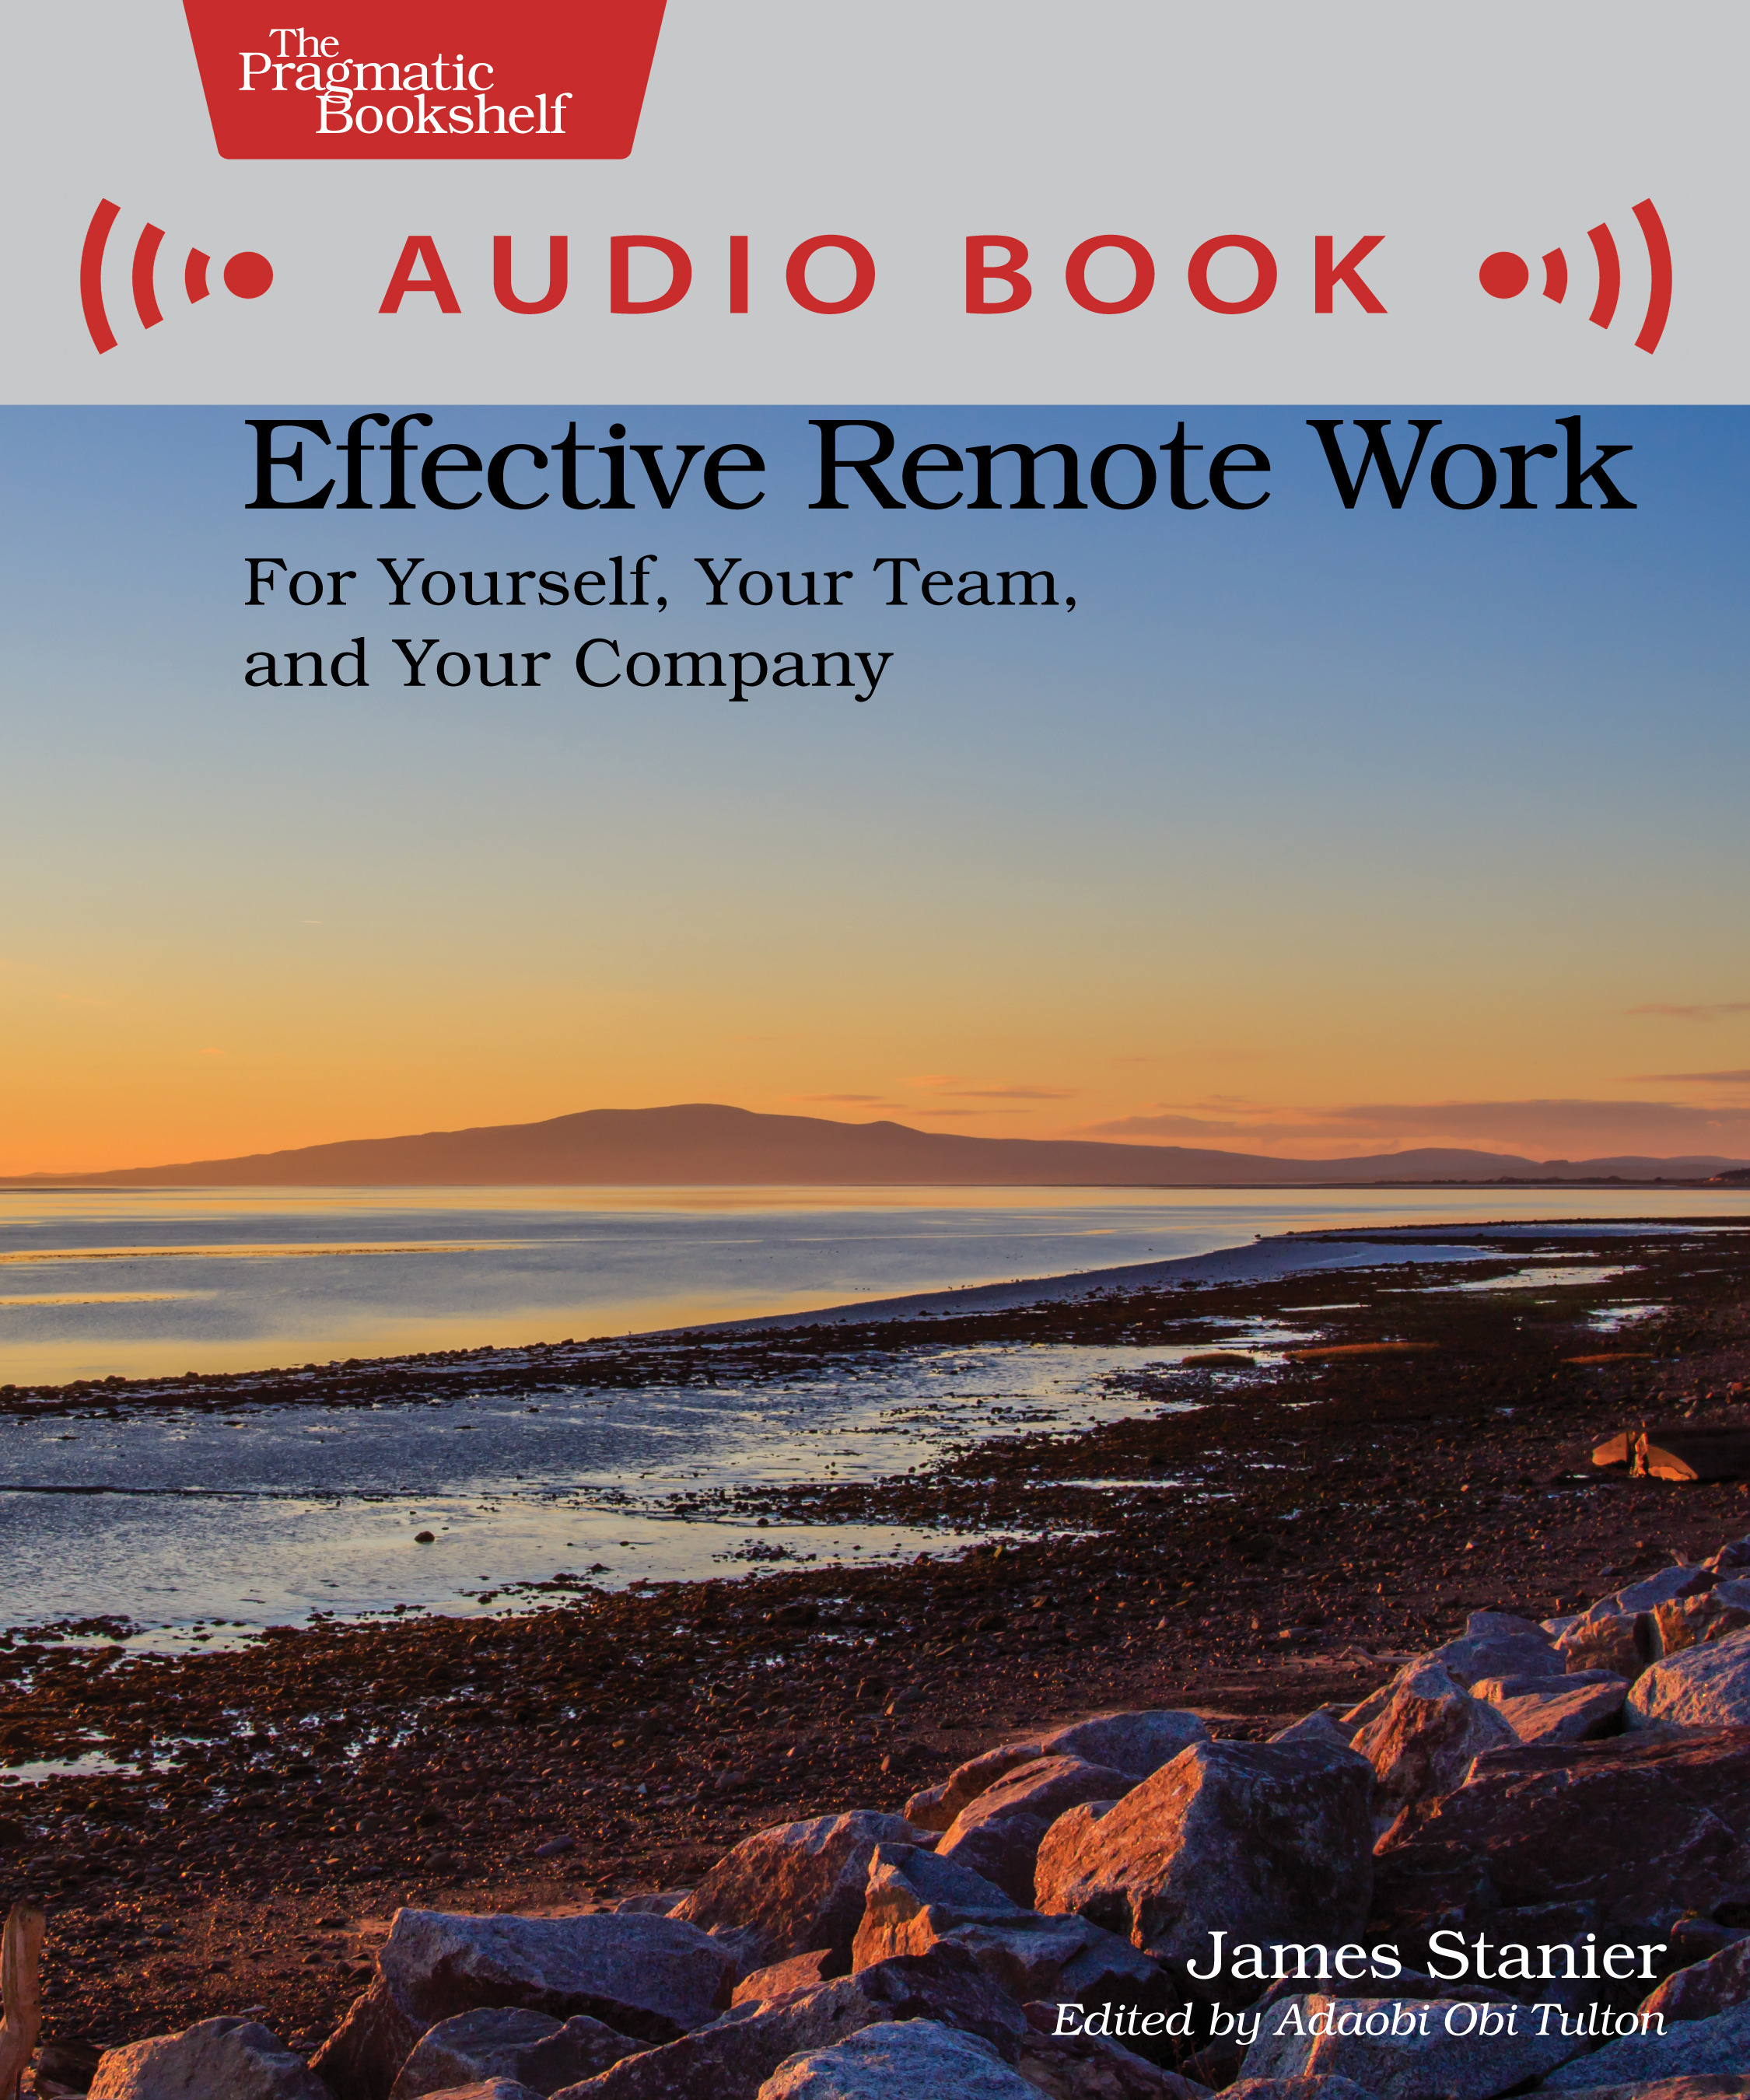 James Stanier: Effective Remote Work (AudiobookFormat, 2022, O'Reilly Media, Incorporated)